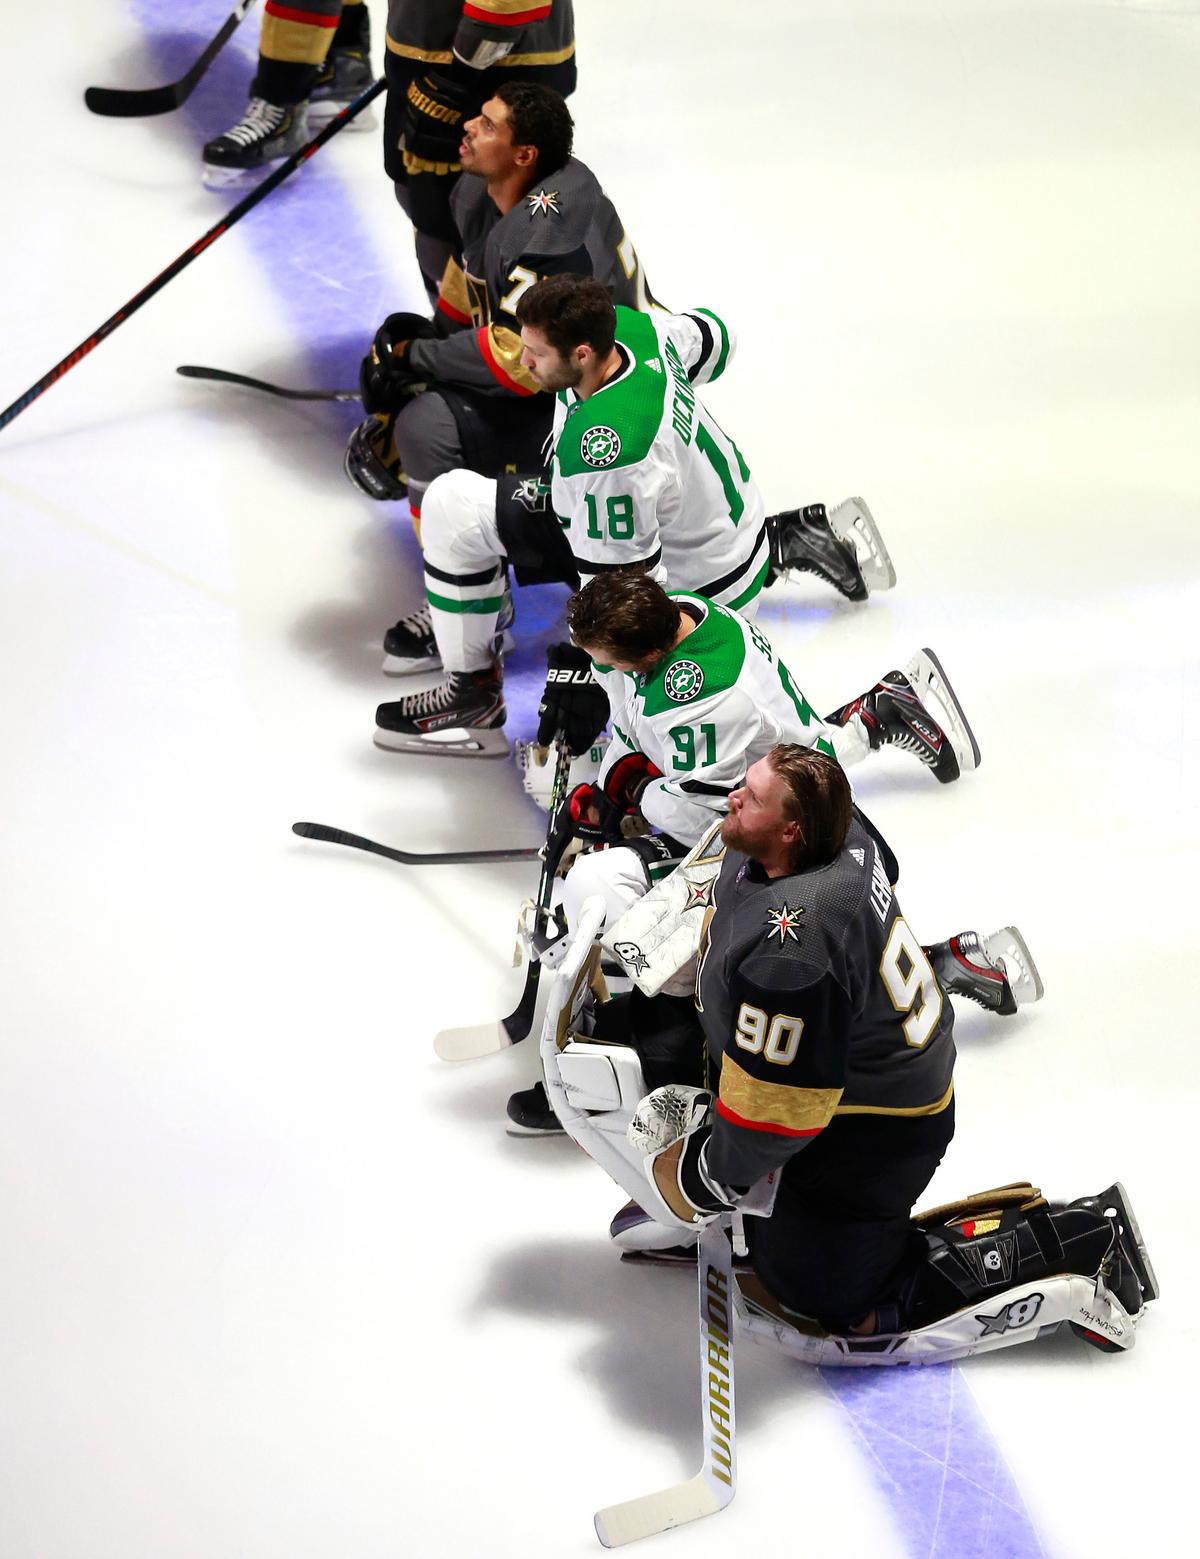 Robin Lehner and Ryan Reaves of the Vegas Golden Knights and Tyler Seguin and Jason Dickinson of the Dallas Stars kneel for the United States anthem before their Western Conference Round Robin game during the 2020 NHL Stanley Cup Playoff at Rogers Place on Aug. 3, 2020, in Edmonton. (Jeff Vinnick/Getty Images)